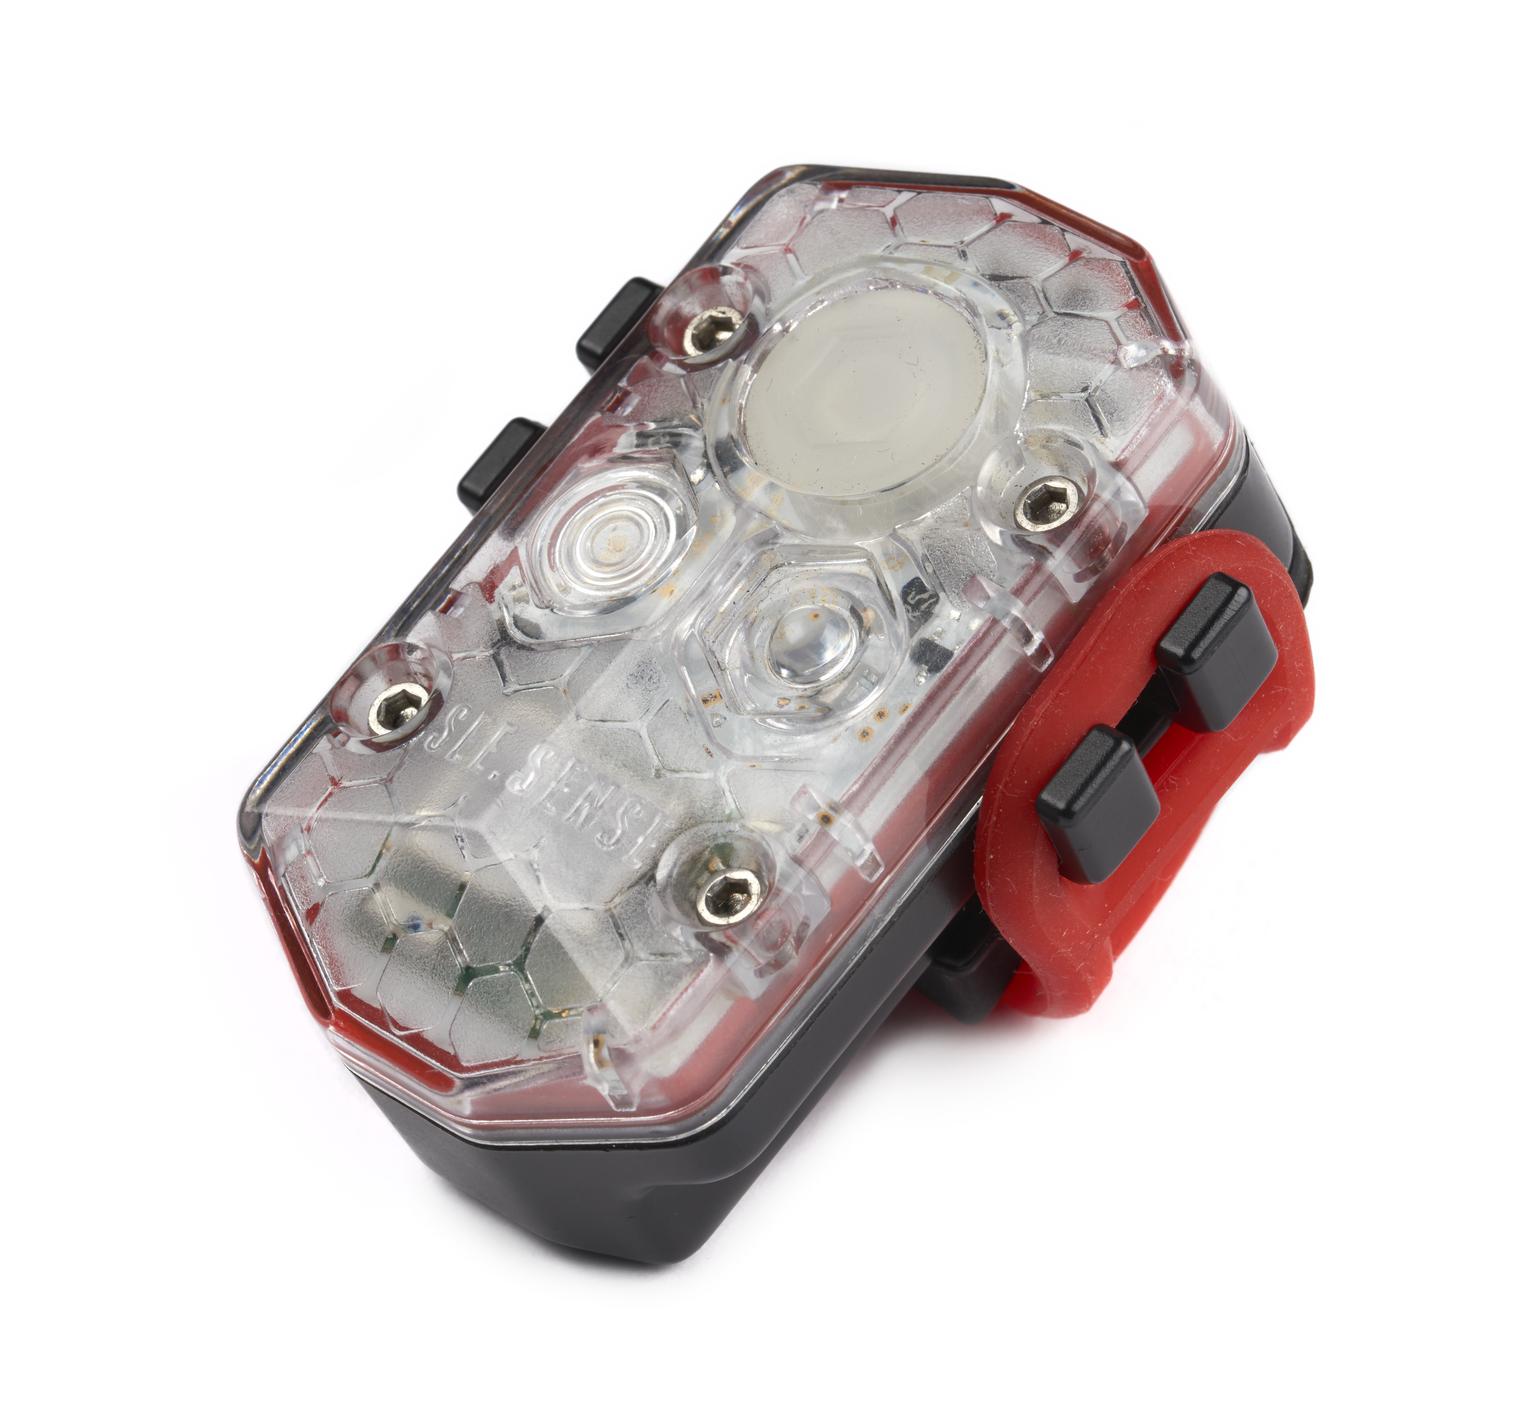 A white and red bike light